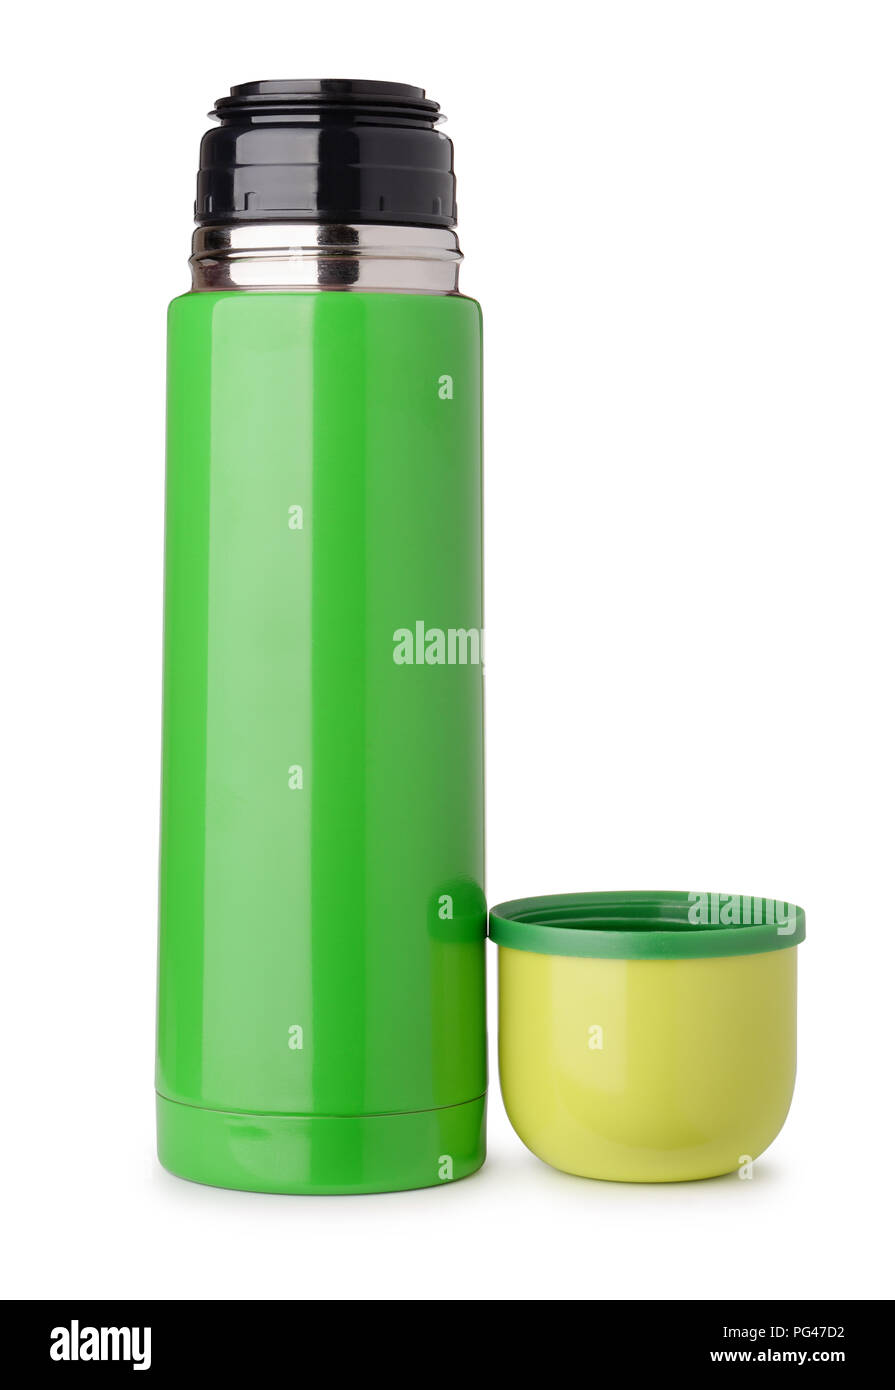 Front view of green thermo flask isolated on white Stock Photo